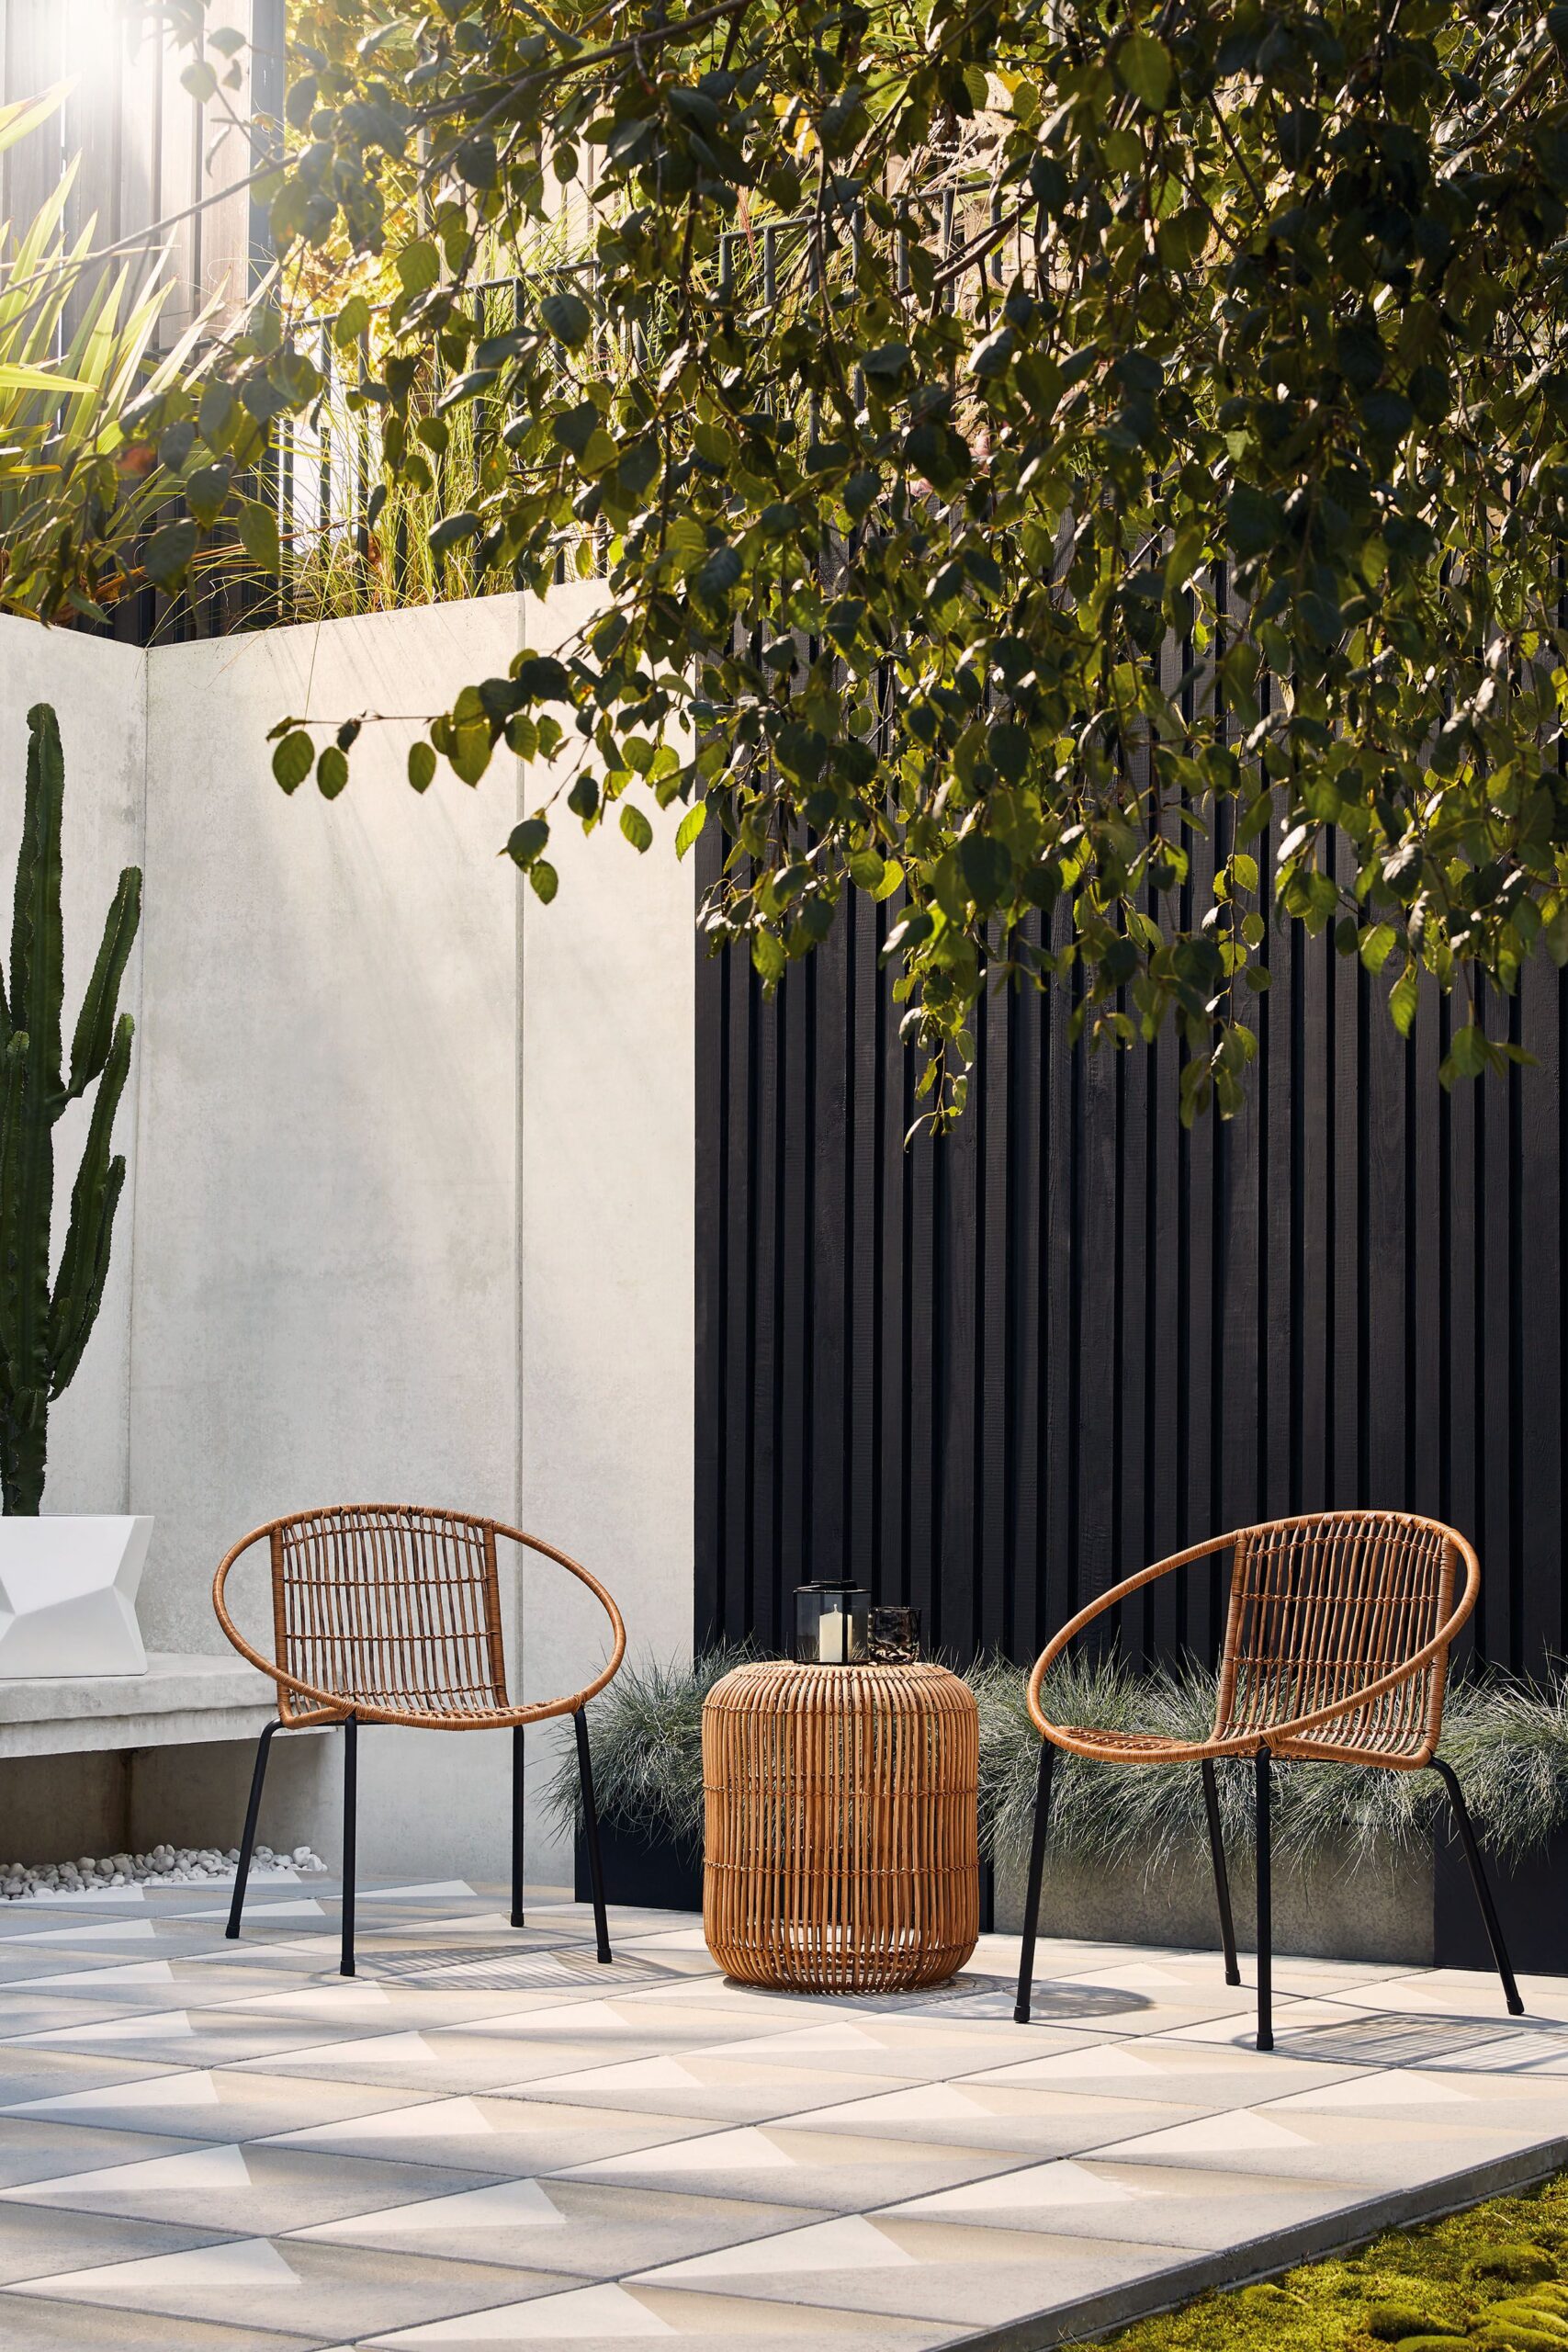 Upgrade Your Outdoor Space with Stylish Garden Furniture